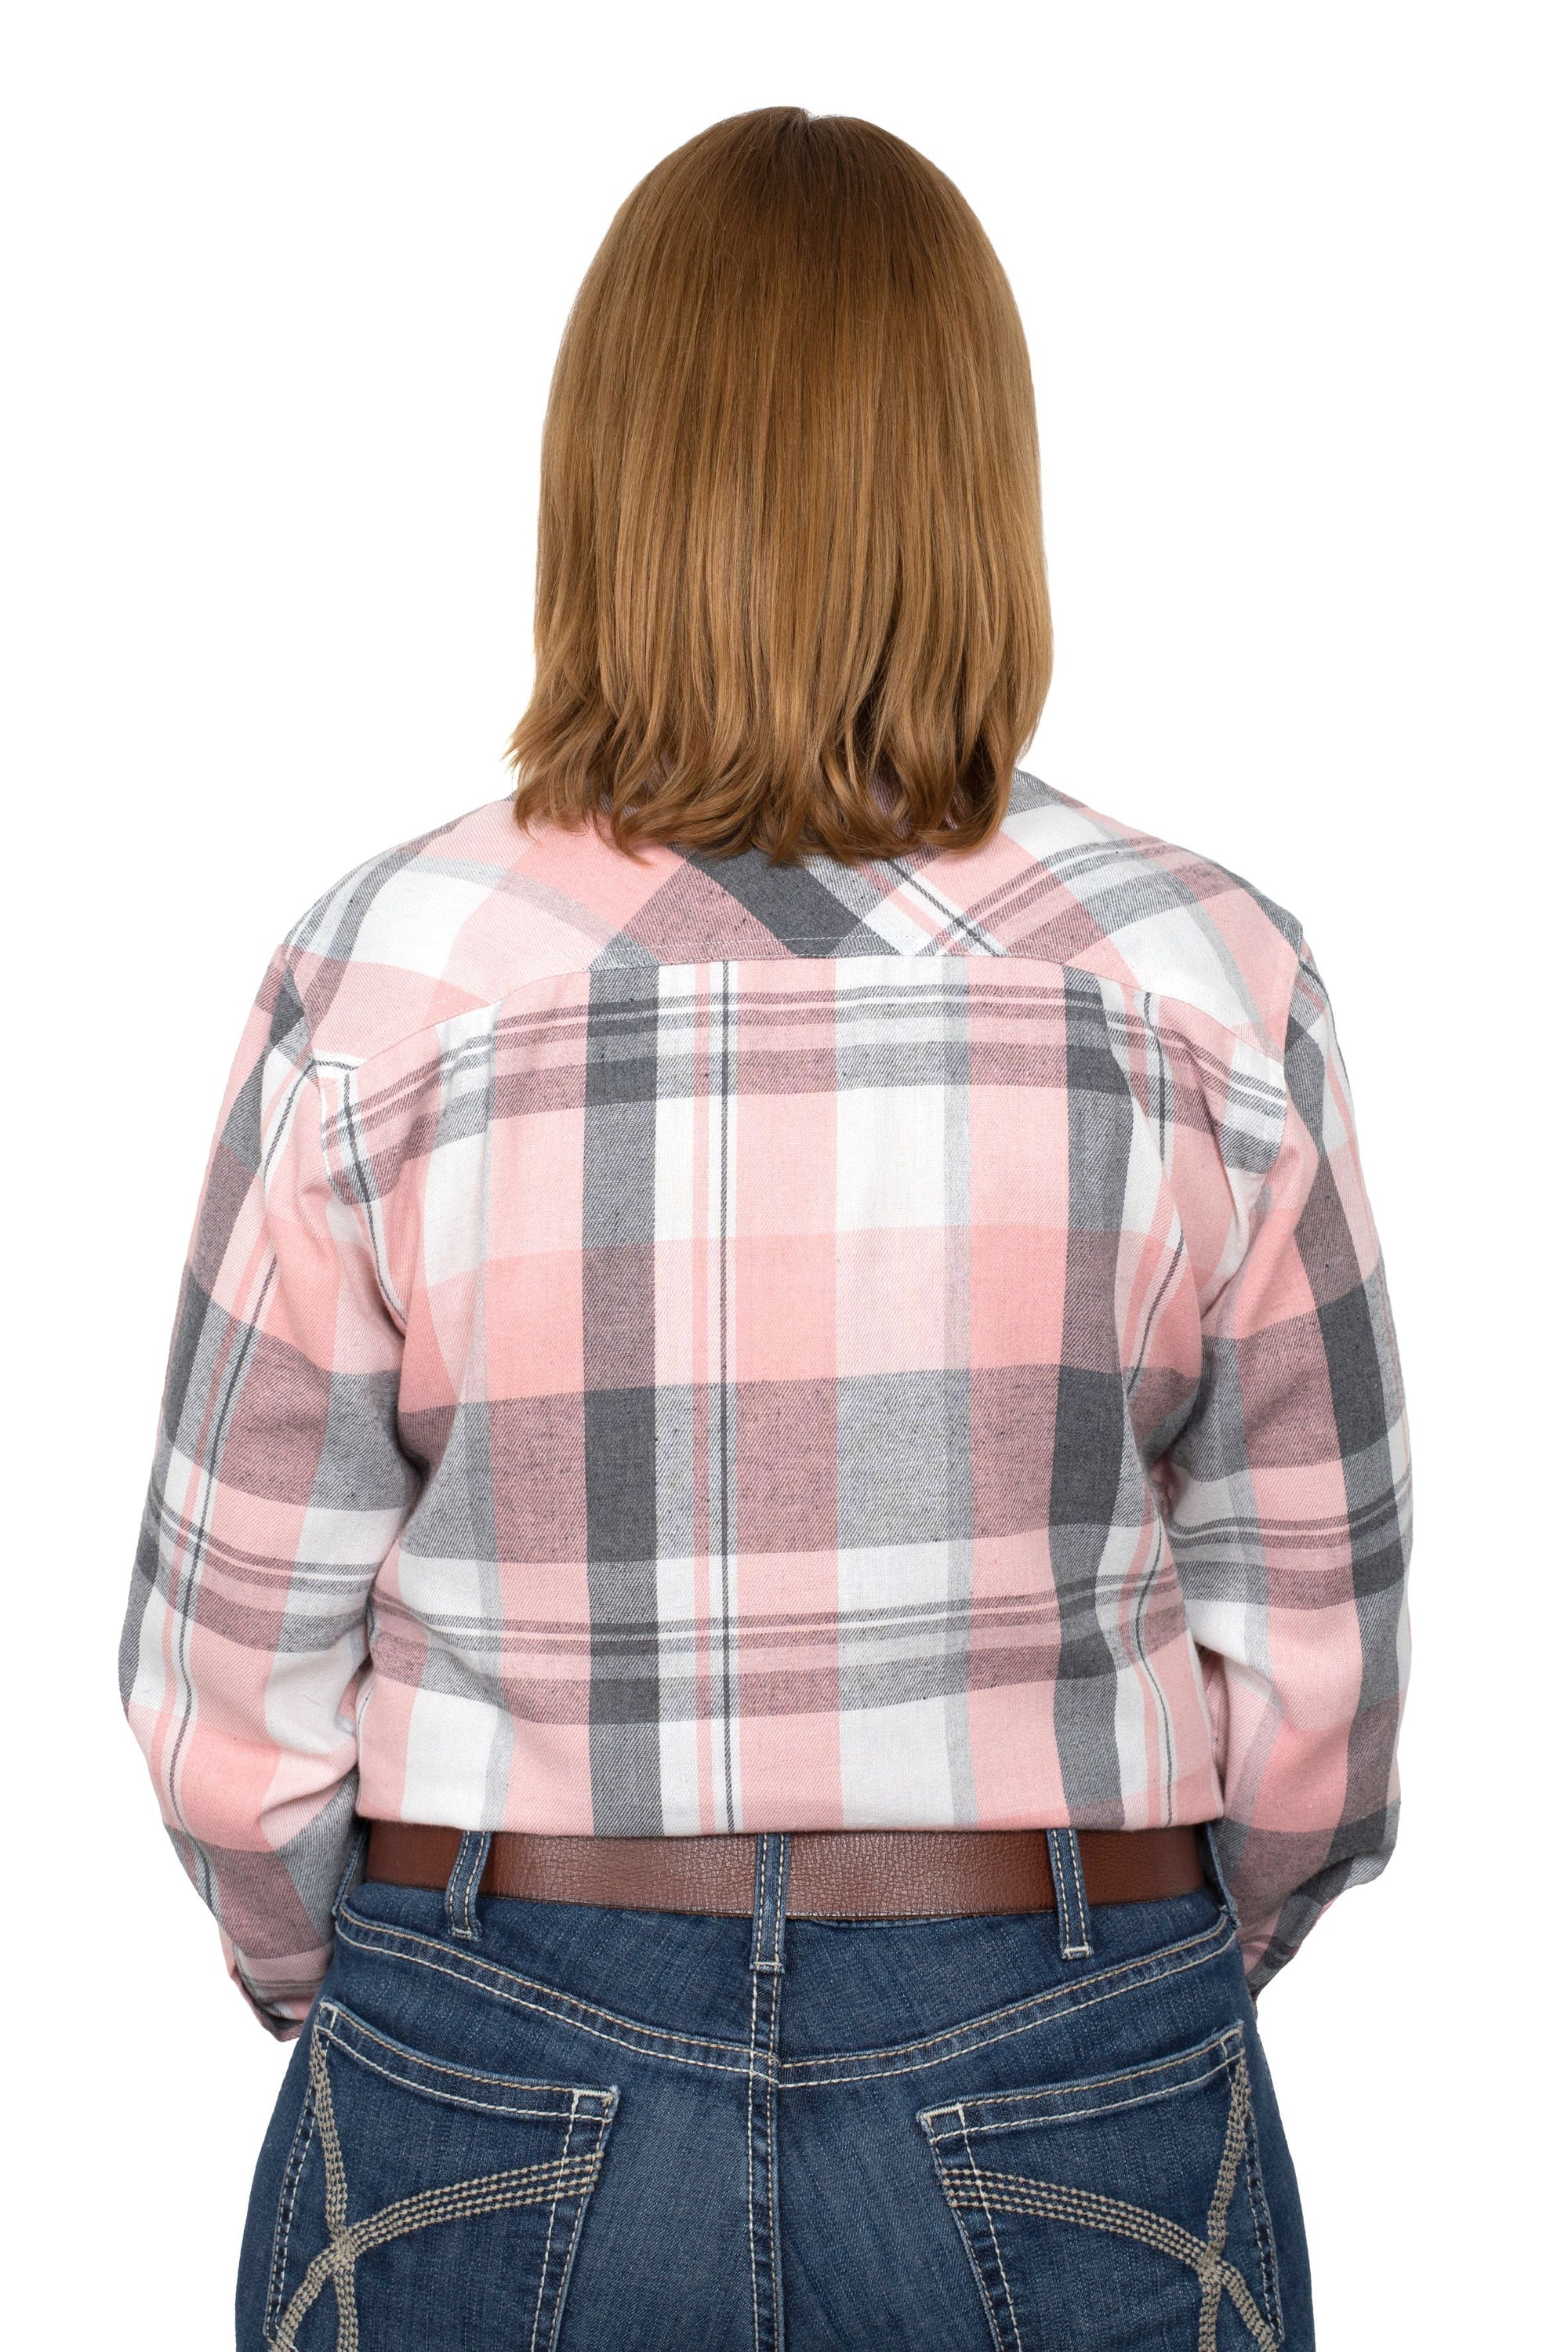 Just Country Wmns Brooke Workshirt Flannel Grey/Pink - Summer Clearance